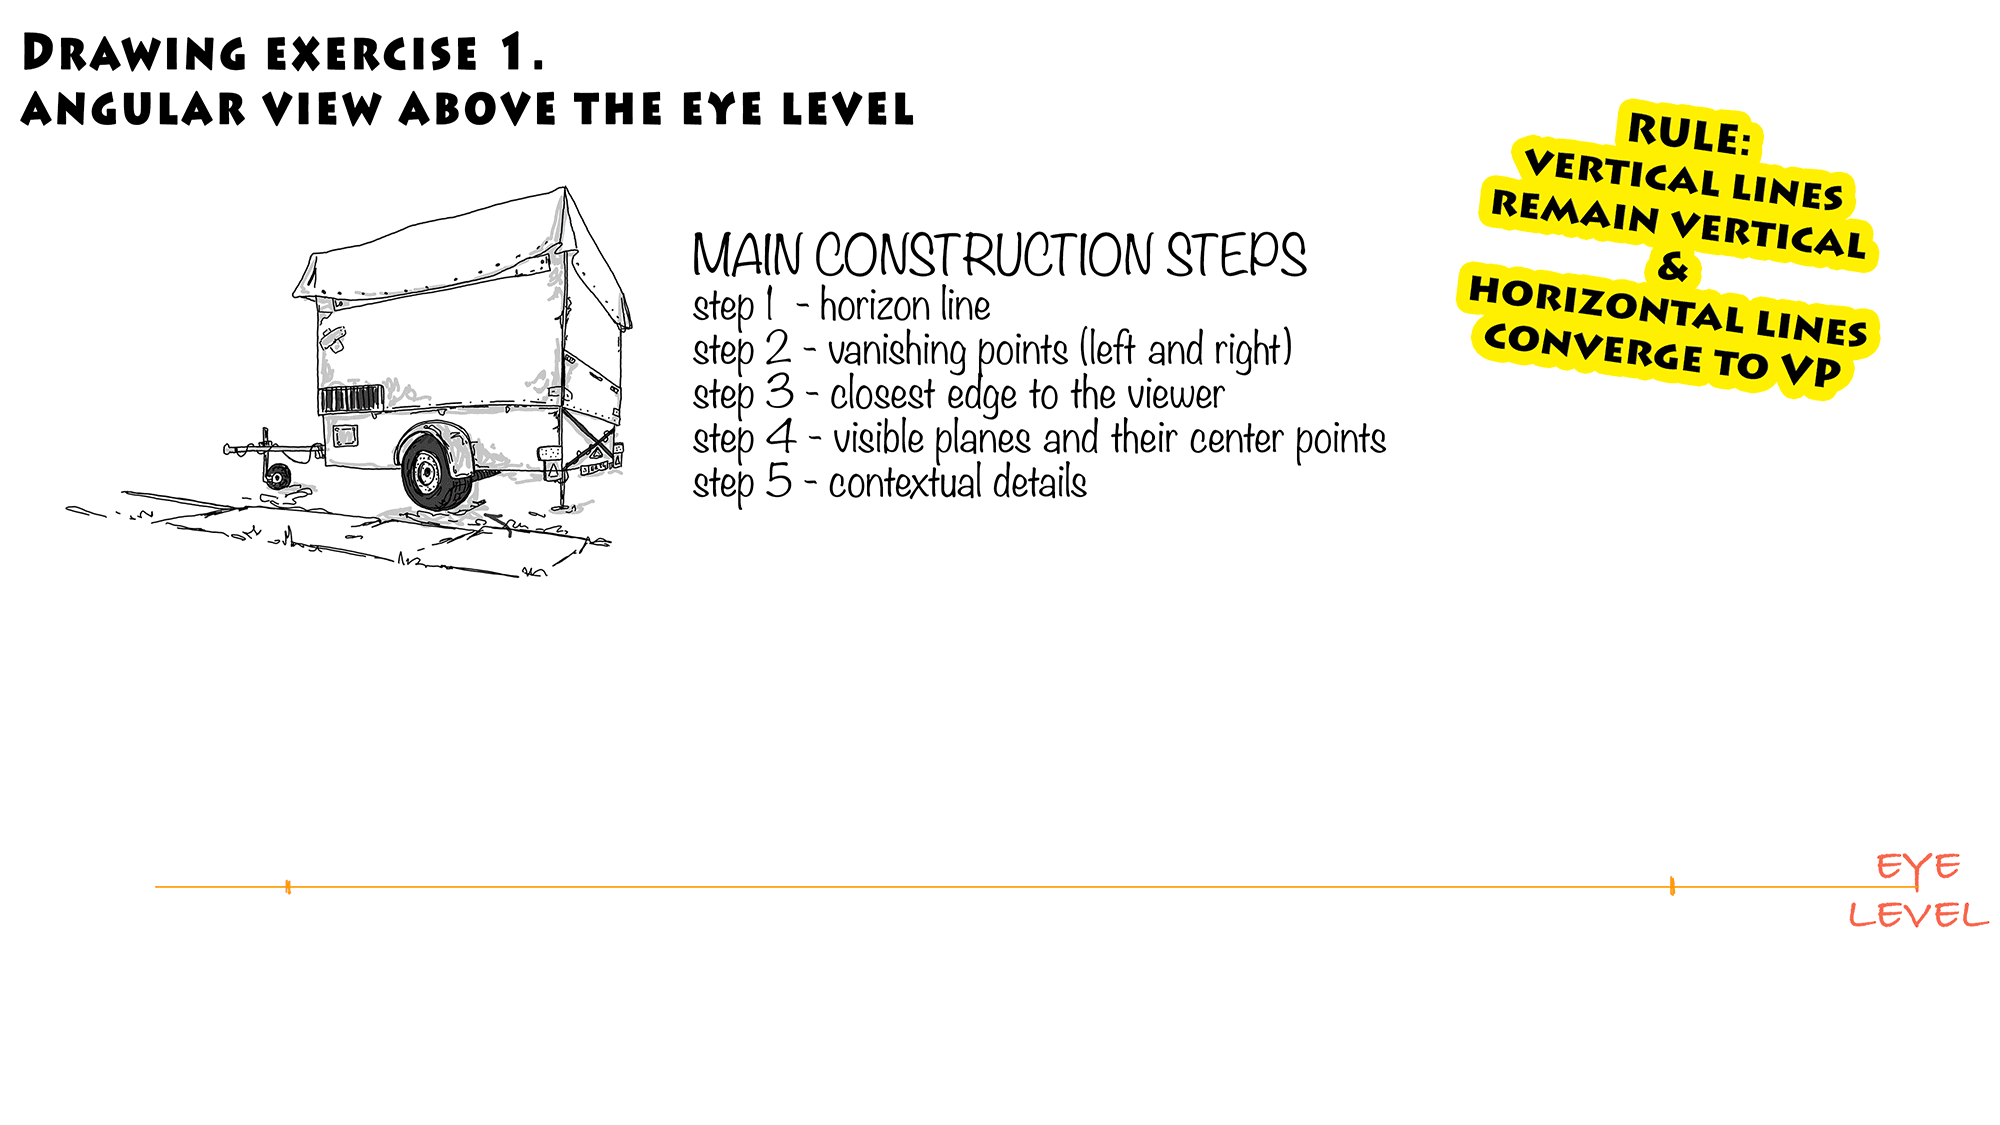 Exercise 1 – Rear and Left views which are visible at the same time – as angular view above the eye level.